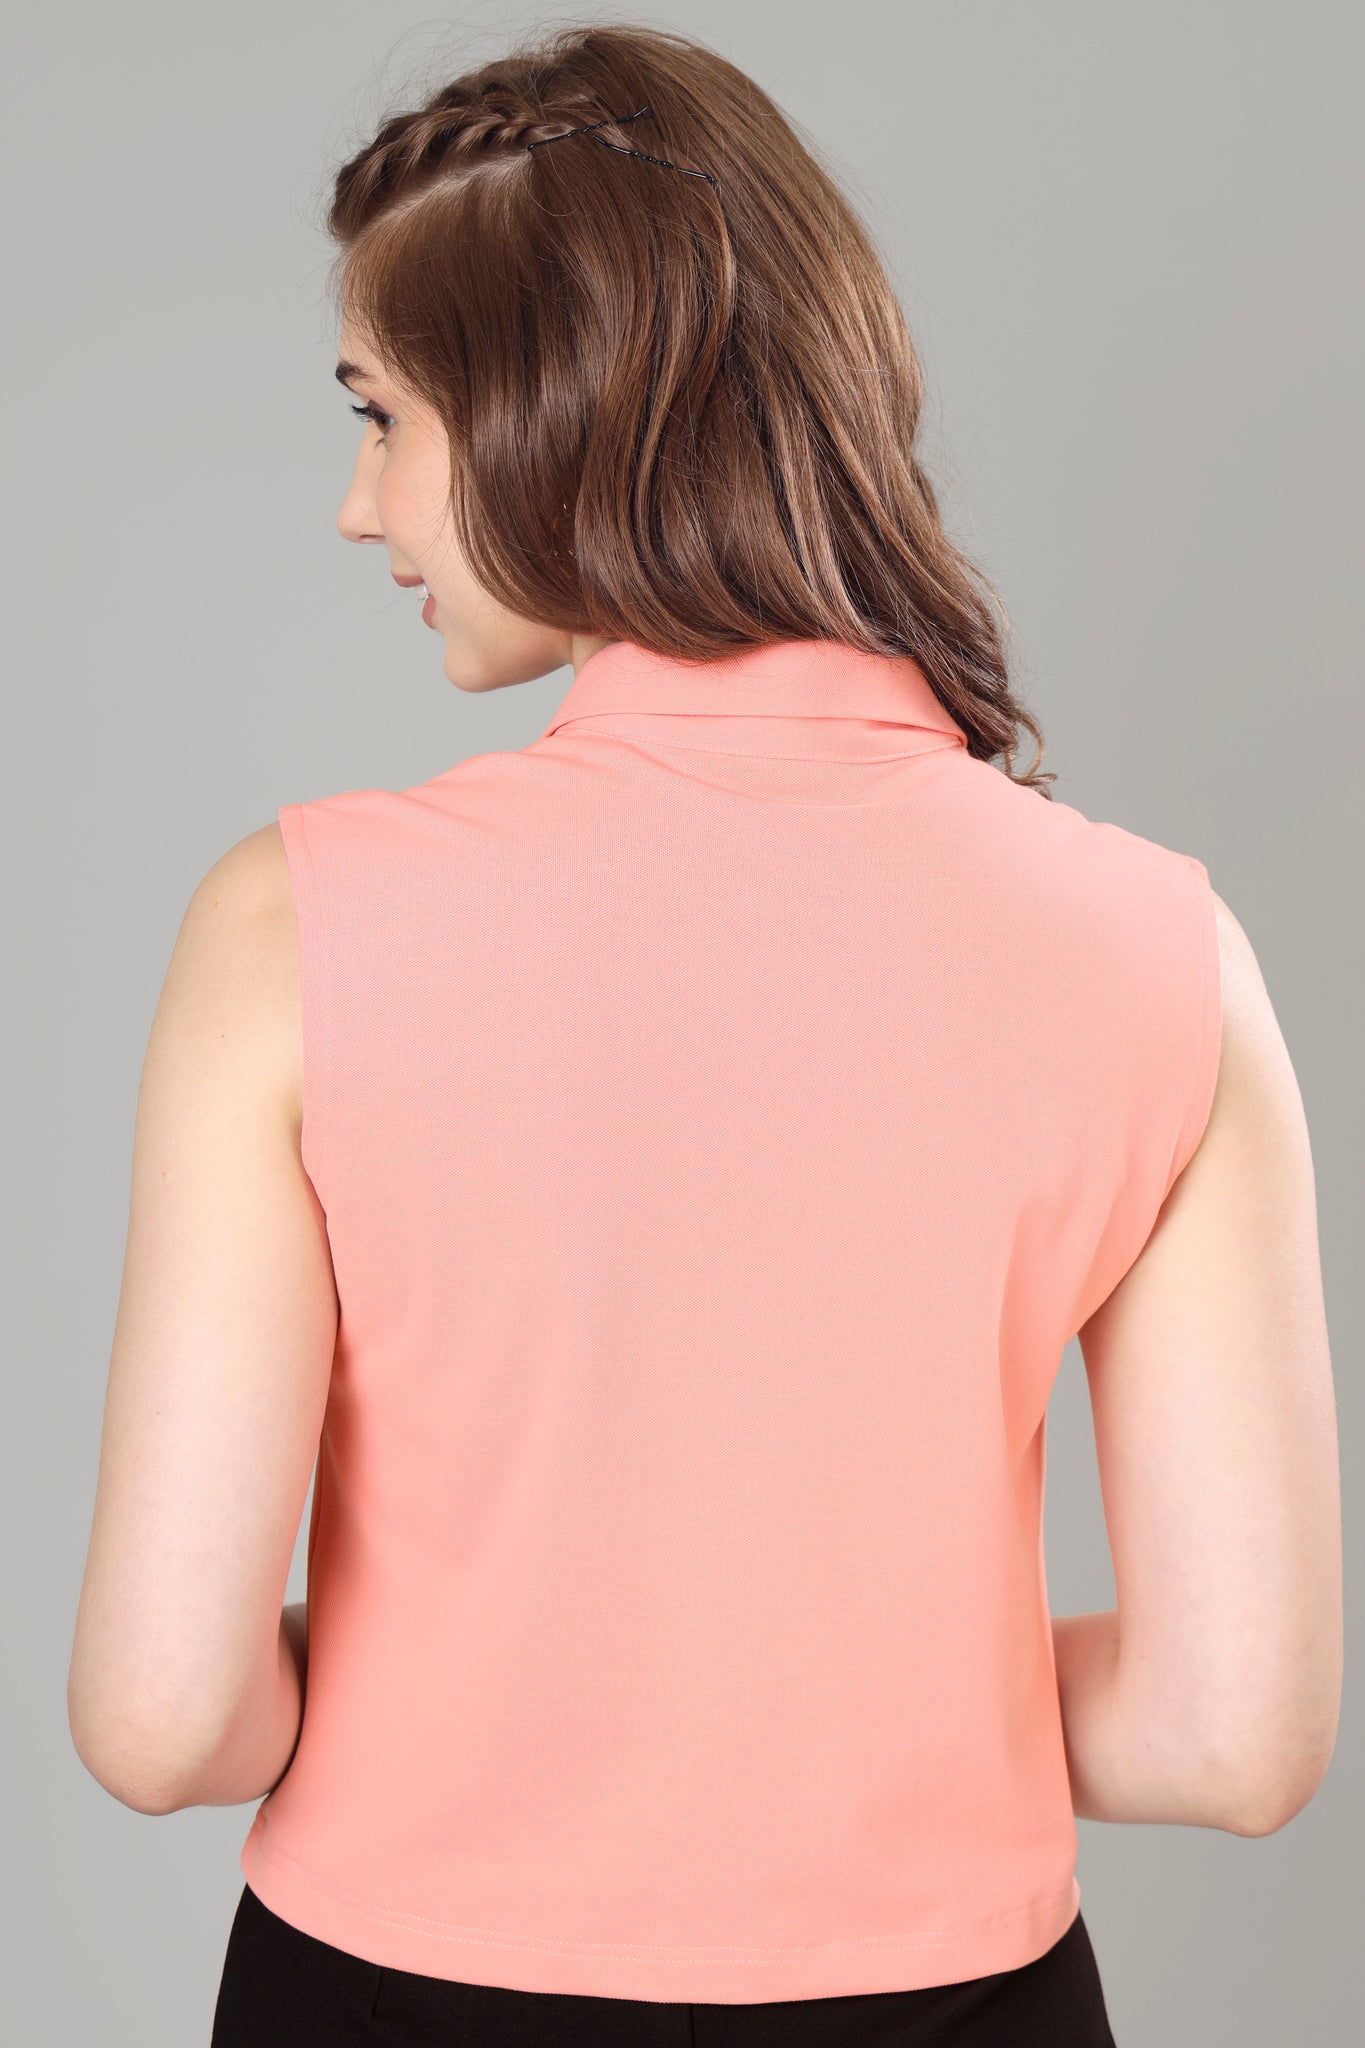 Exclusive Rose Pink Polo Sleeveless T-Shirt For Women